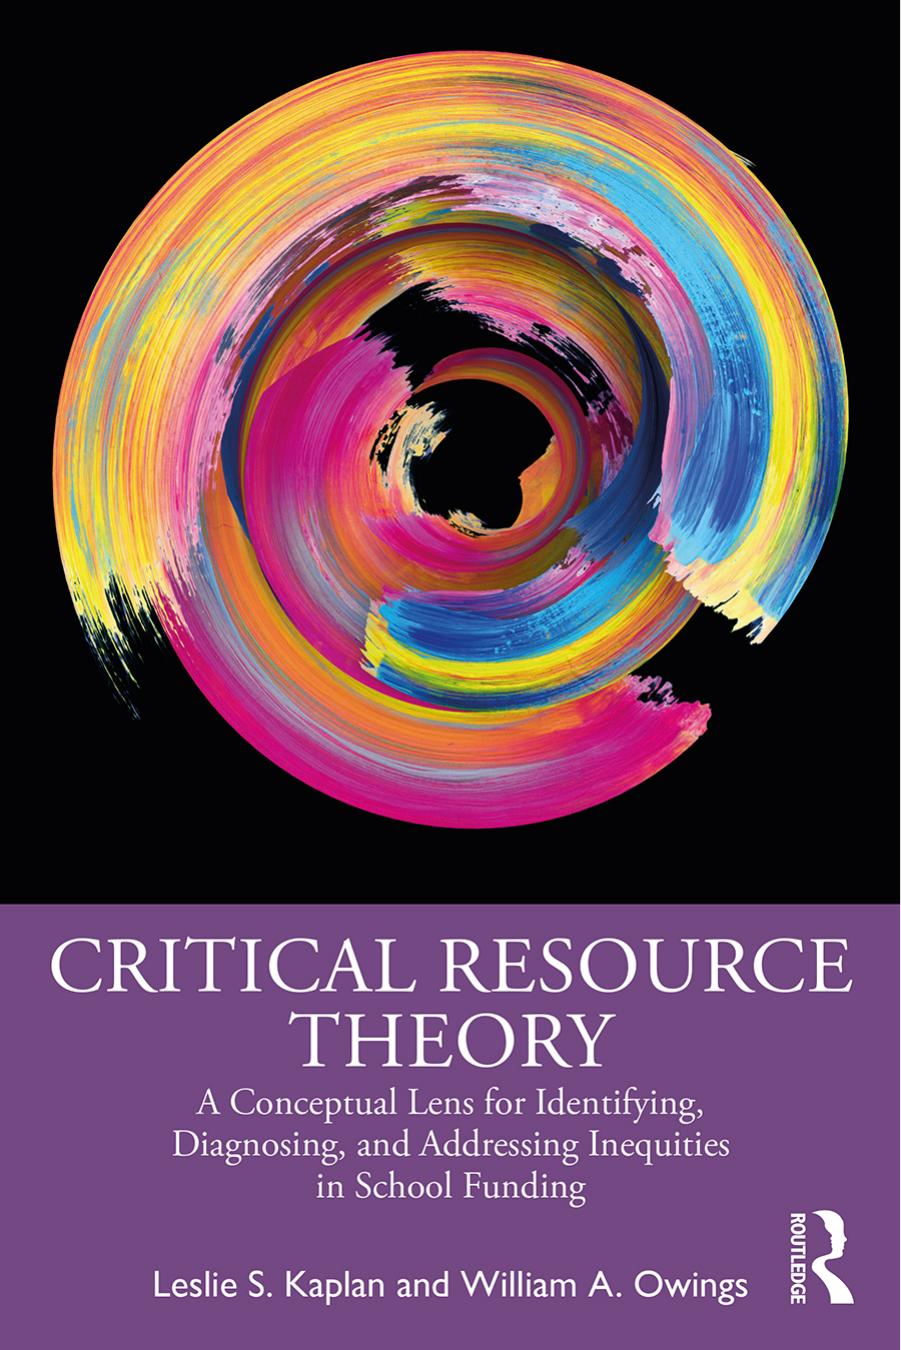 Critical Resource Theory: A Conceptual Lens for Identifying, Diagnosing, and Addressing Inequities in School Funding by Leslie S. Kaplan William A. Owings